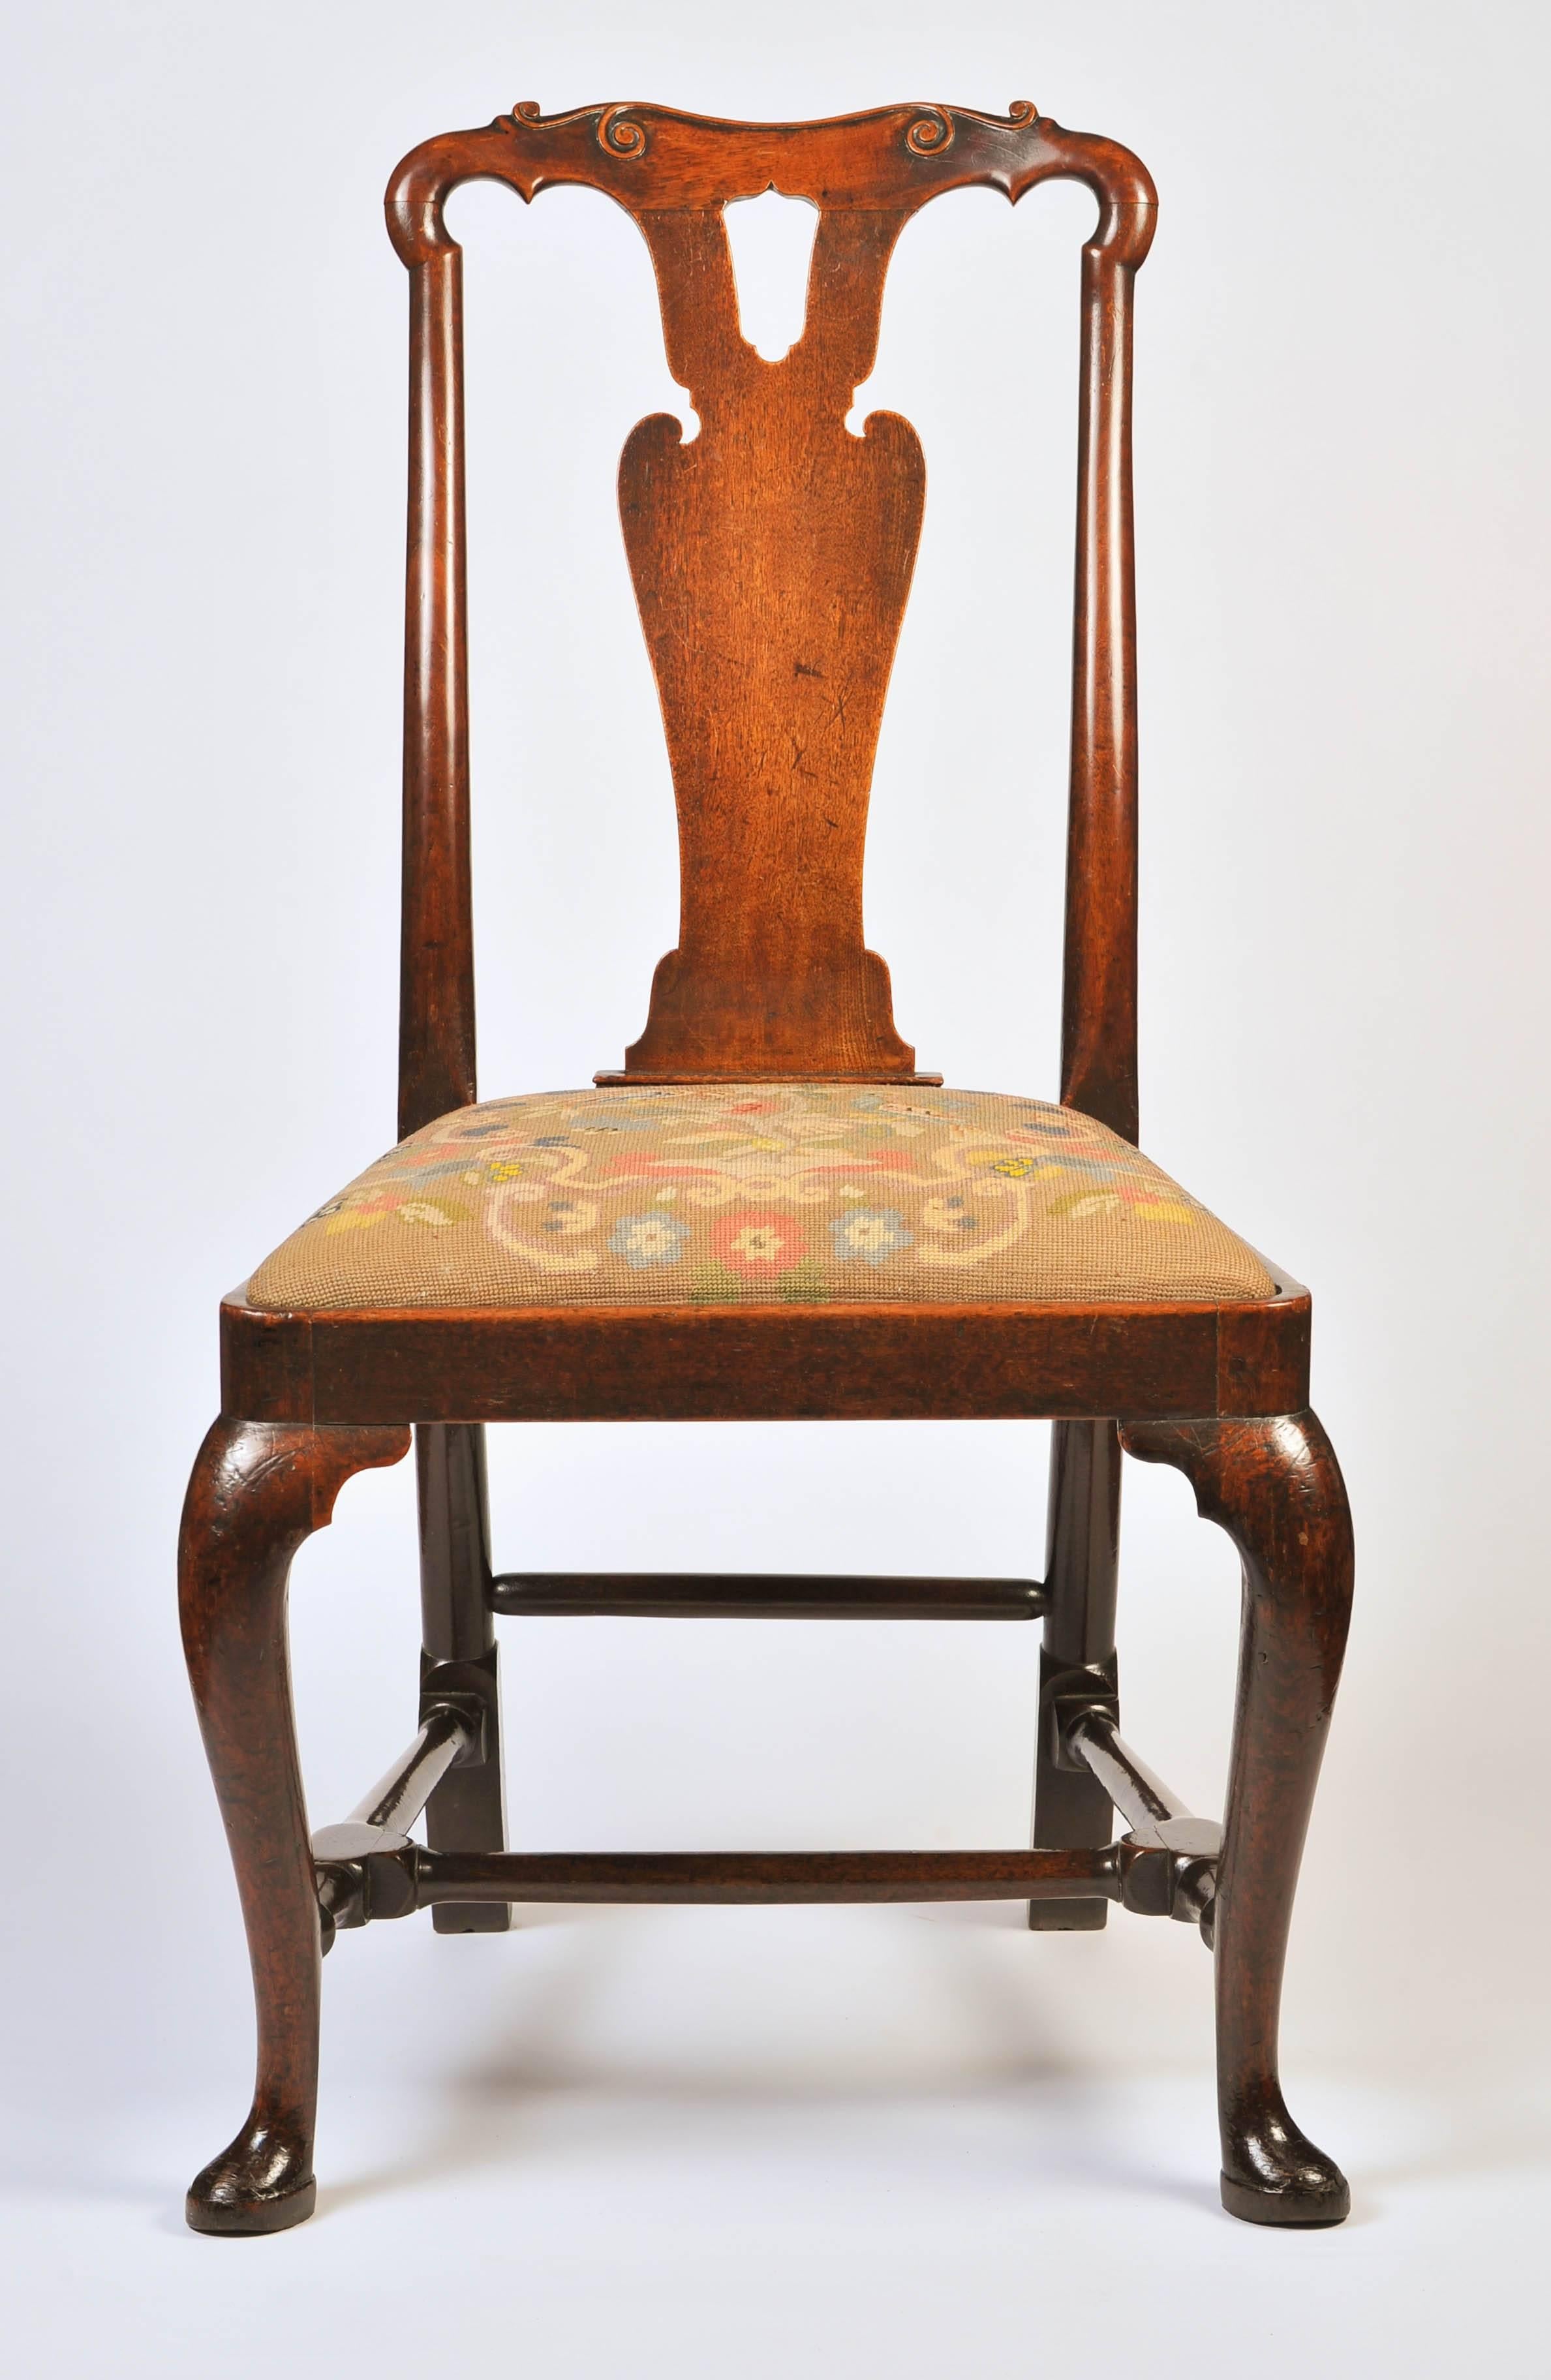 A fabulous pair of early George I period English walnut chairs in the Chinese taste.
The top rail with carved scrolls above a shaped splat back; the drop in seats with contemporary needlework covers over cabriole legs and slipper pad feet to the